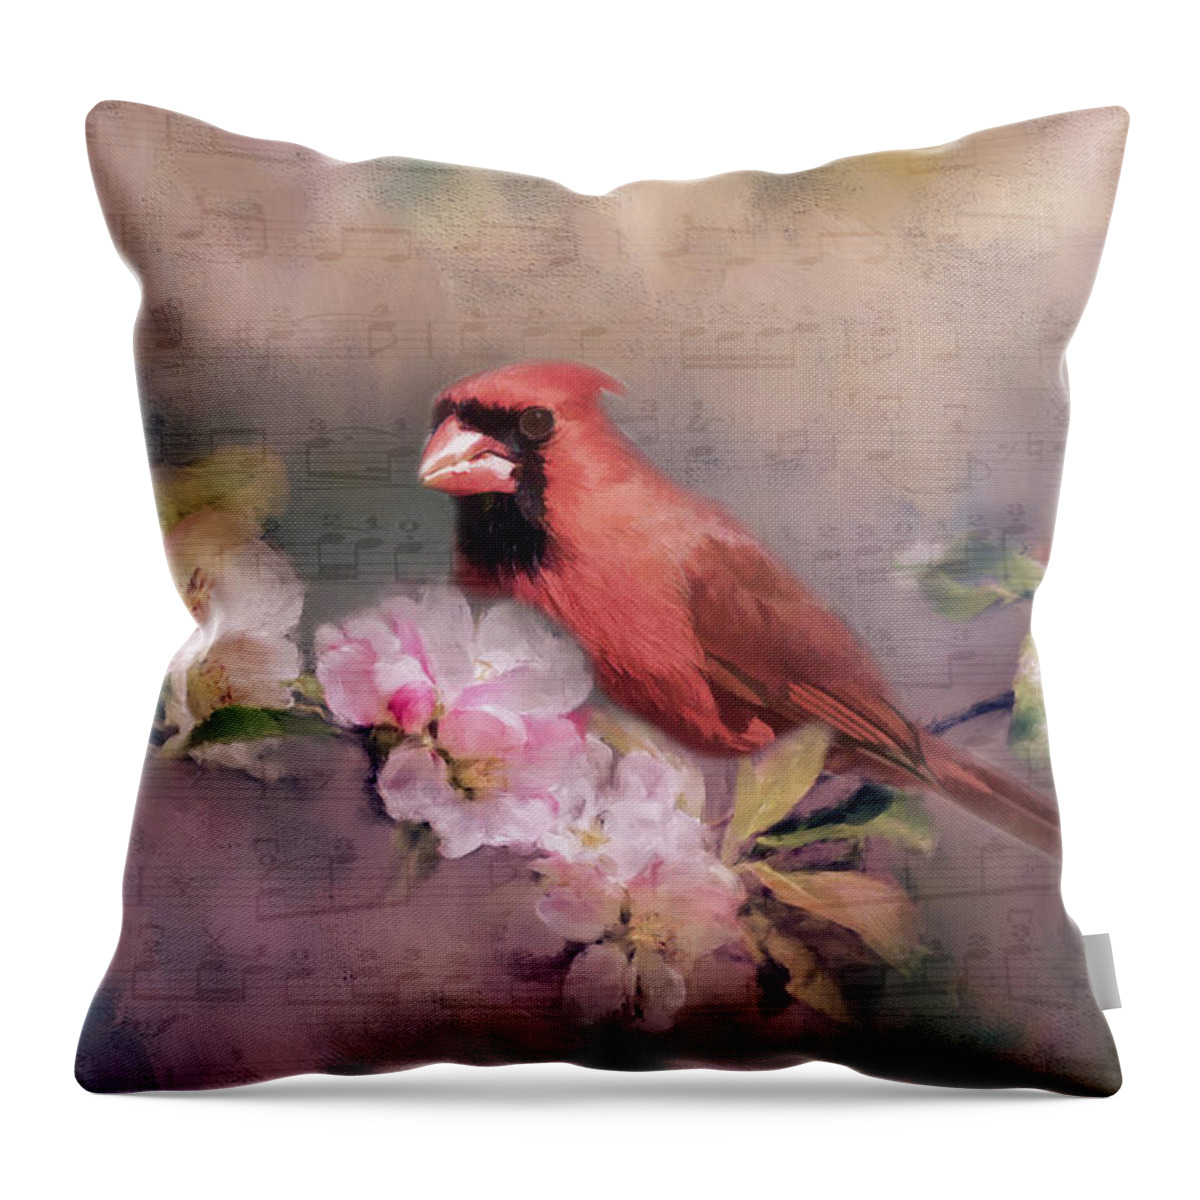 Flower Throw Pillow featuring the photograph Spring Song by Cathy Kovarik